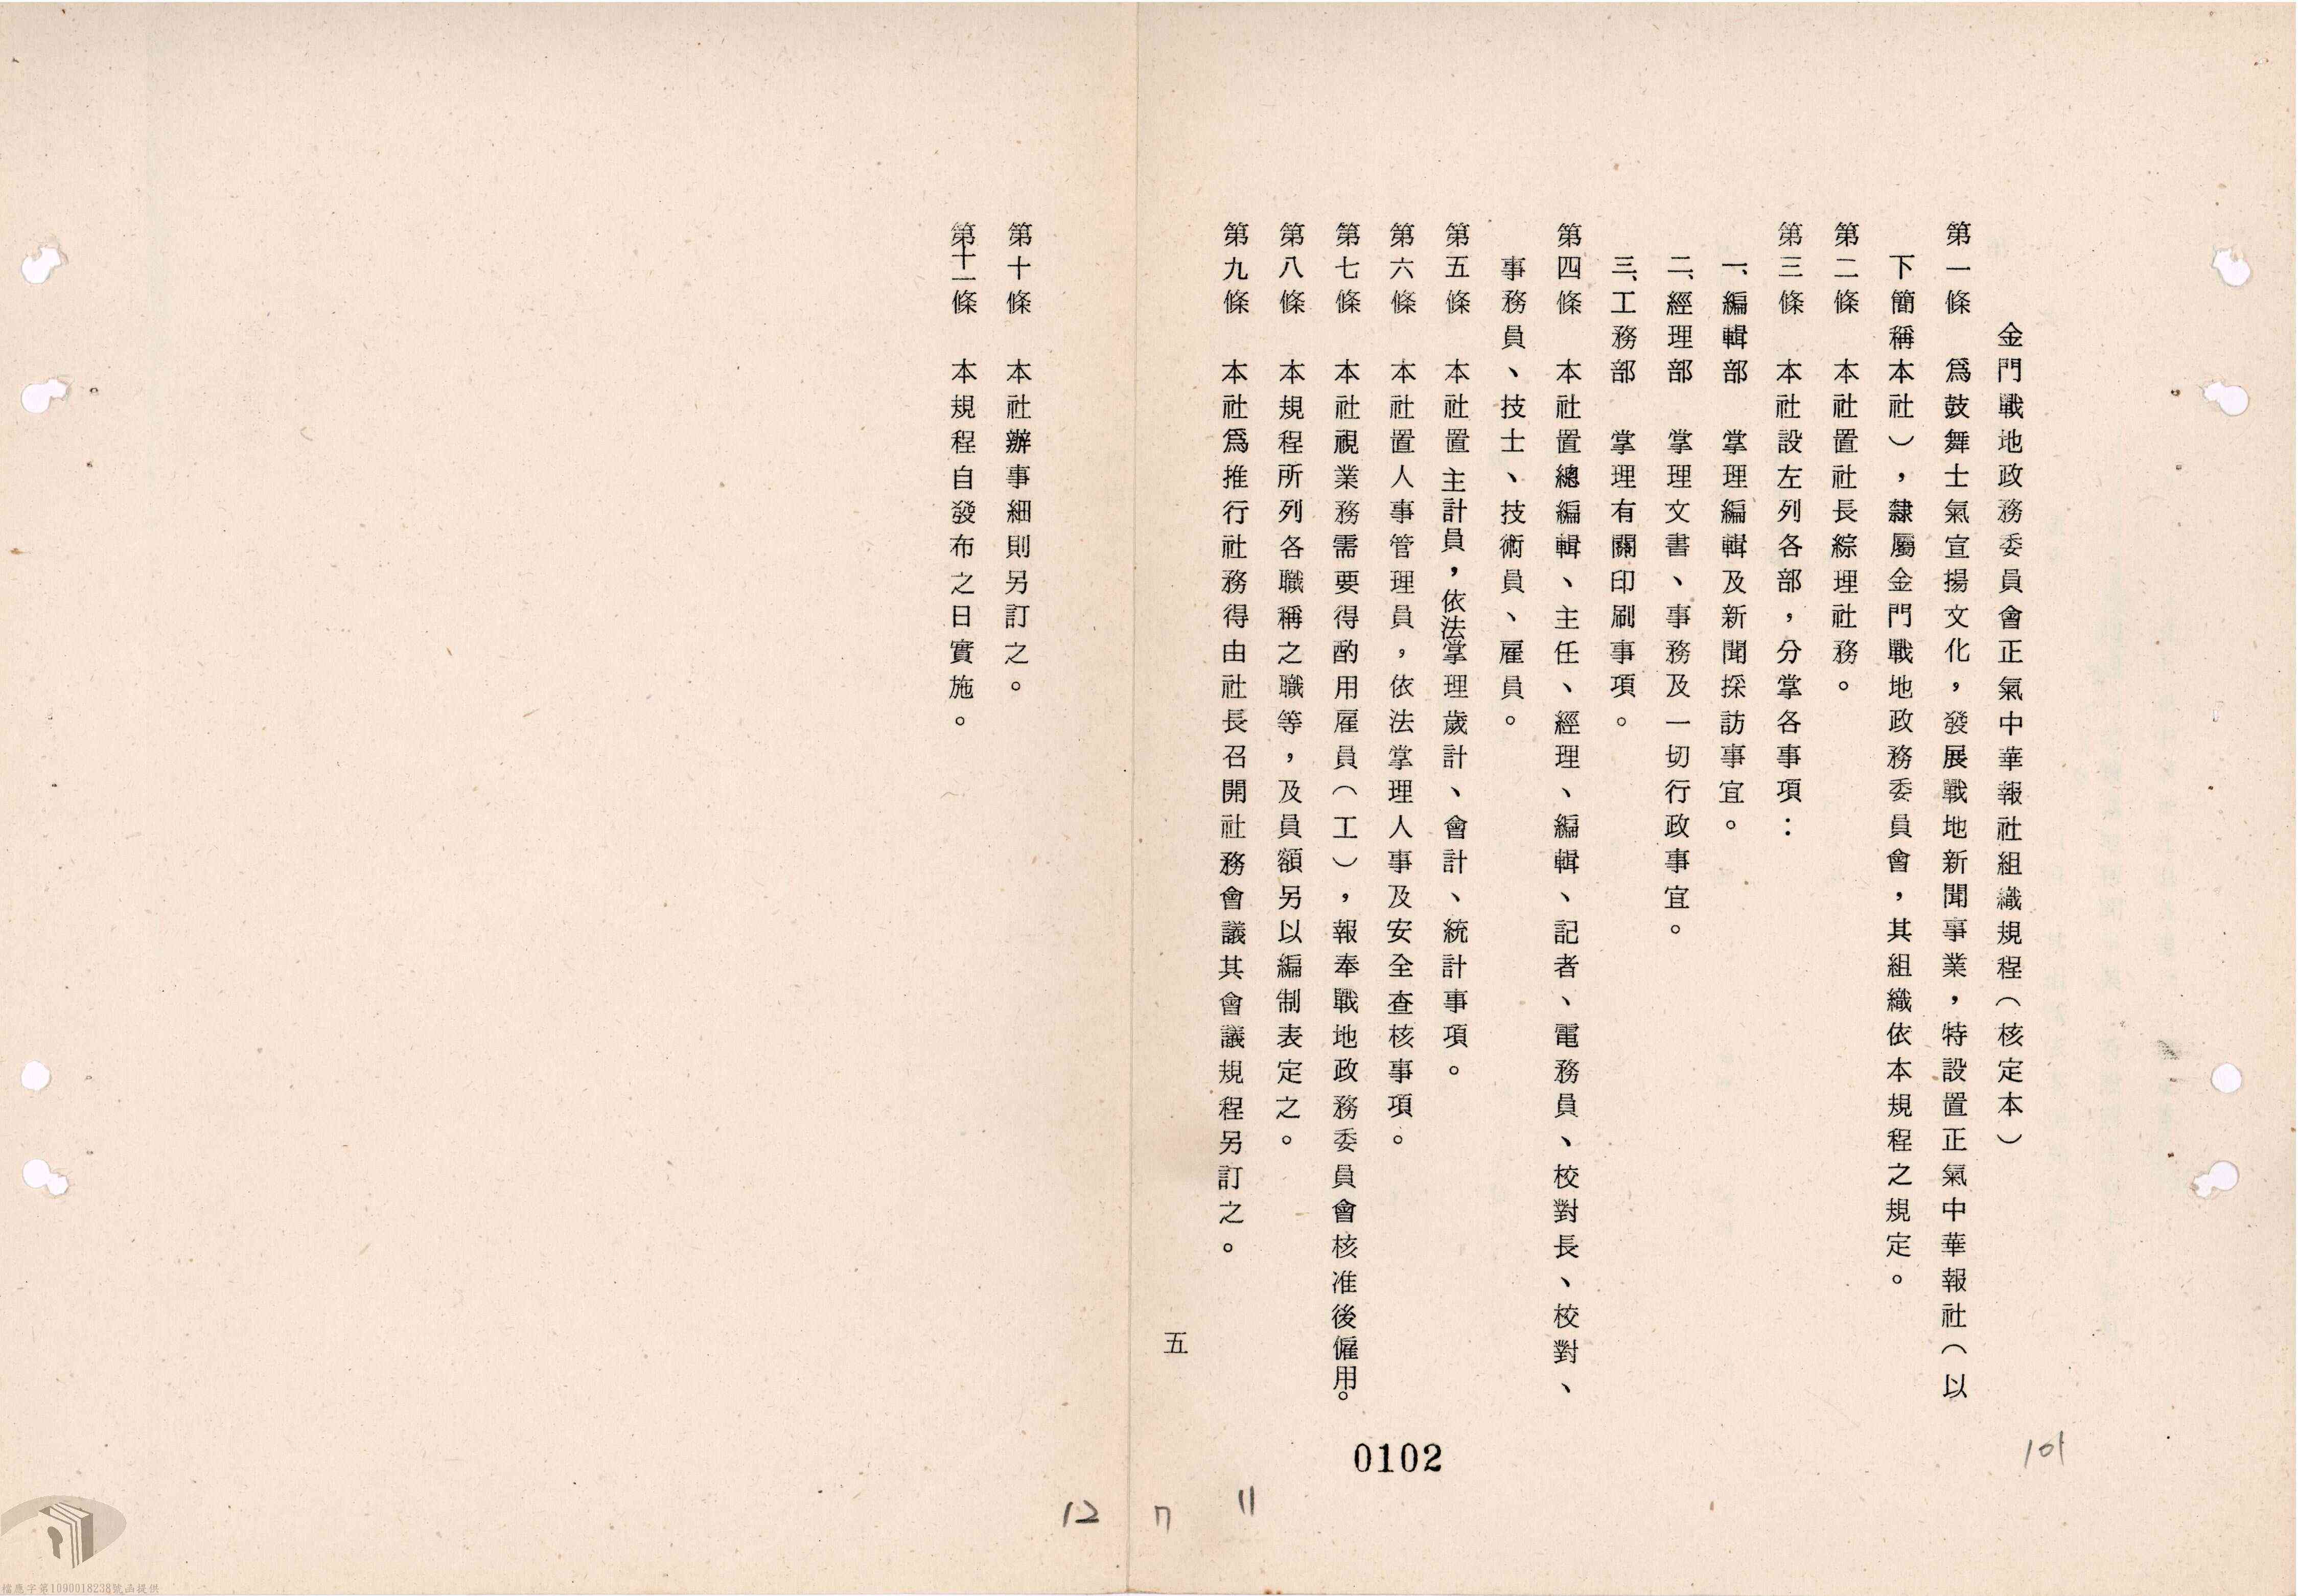 May 1974, Organizational Regulations of the Kinmen Chengchi Chunghua News Agency during the period of military administration.